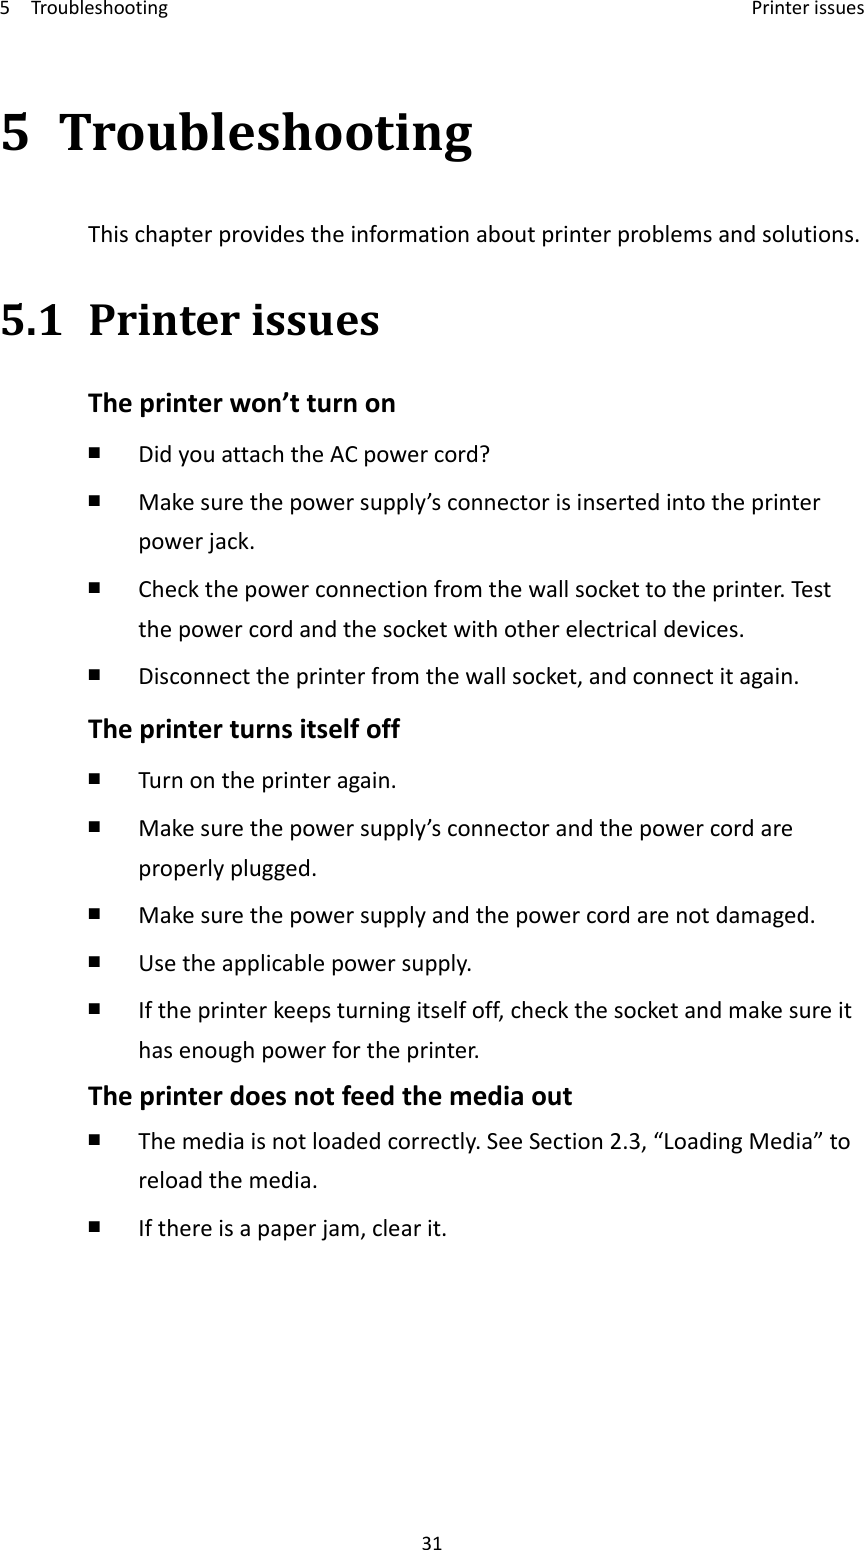 5Troubleshooting Printerissues315 TroubleshootingThischapterprovidestheinformationaboutprinterproblemsandsolutions.5.1 PrinterissuesTheprinterwon’tturnon￭ DidyouattachtheACpowercord?￭ Makesurethepowersupply’sconnectorisinsertedintotheprinterpowerjack.￭ Checkthepowerconnectionfromthewallsockettotheprinter.Testthepowercordandthesocketwithotherelectricaldevices.￭ Disconnecttheprinterfromthewallsocket,andconnectitagain.Theprinterturnsitselfoff￭ Turnontheprinteragain.￭ Makesurethepowersupply’sconnectorandthepowercordareproperlyplugged.￭ Makesurethepowersupplyandthepowercordarenotdamaged.￭ Usetheapplicablepowersupply.￭ Iftheprinterkeepsturningitselfoff,checkthesocketandmakesureithasenoughpowerfortheprinter.Theprinterdoesnotfeedthemediaout￭ Themediaisnotloadedcorrectly.SeeSection2.3,“LoadingMedia”toreloadthemedia.￭ Ifthereisapaperjam,clearit.